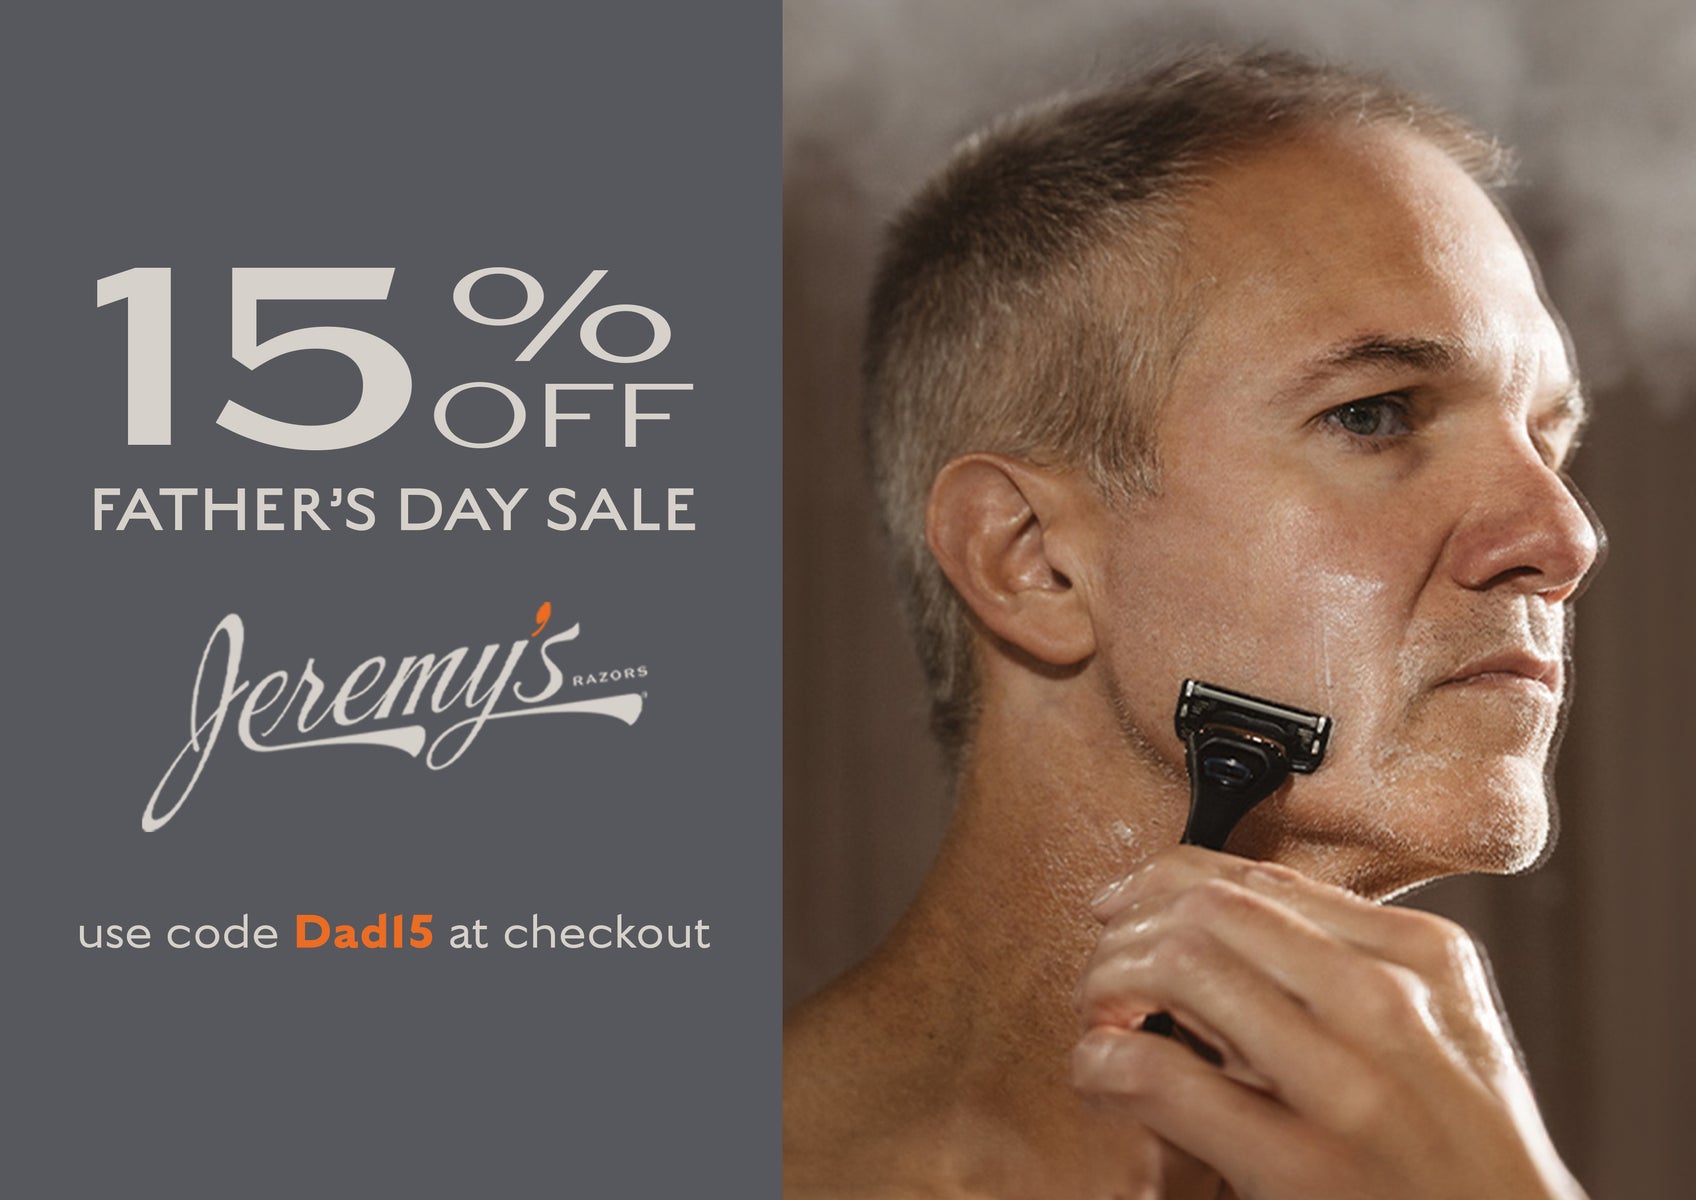 Jeremy's Razors 15% Off Father's Day Sale. Use code Dad15 at checkout.